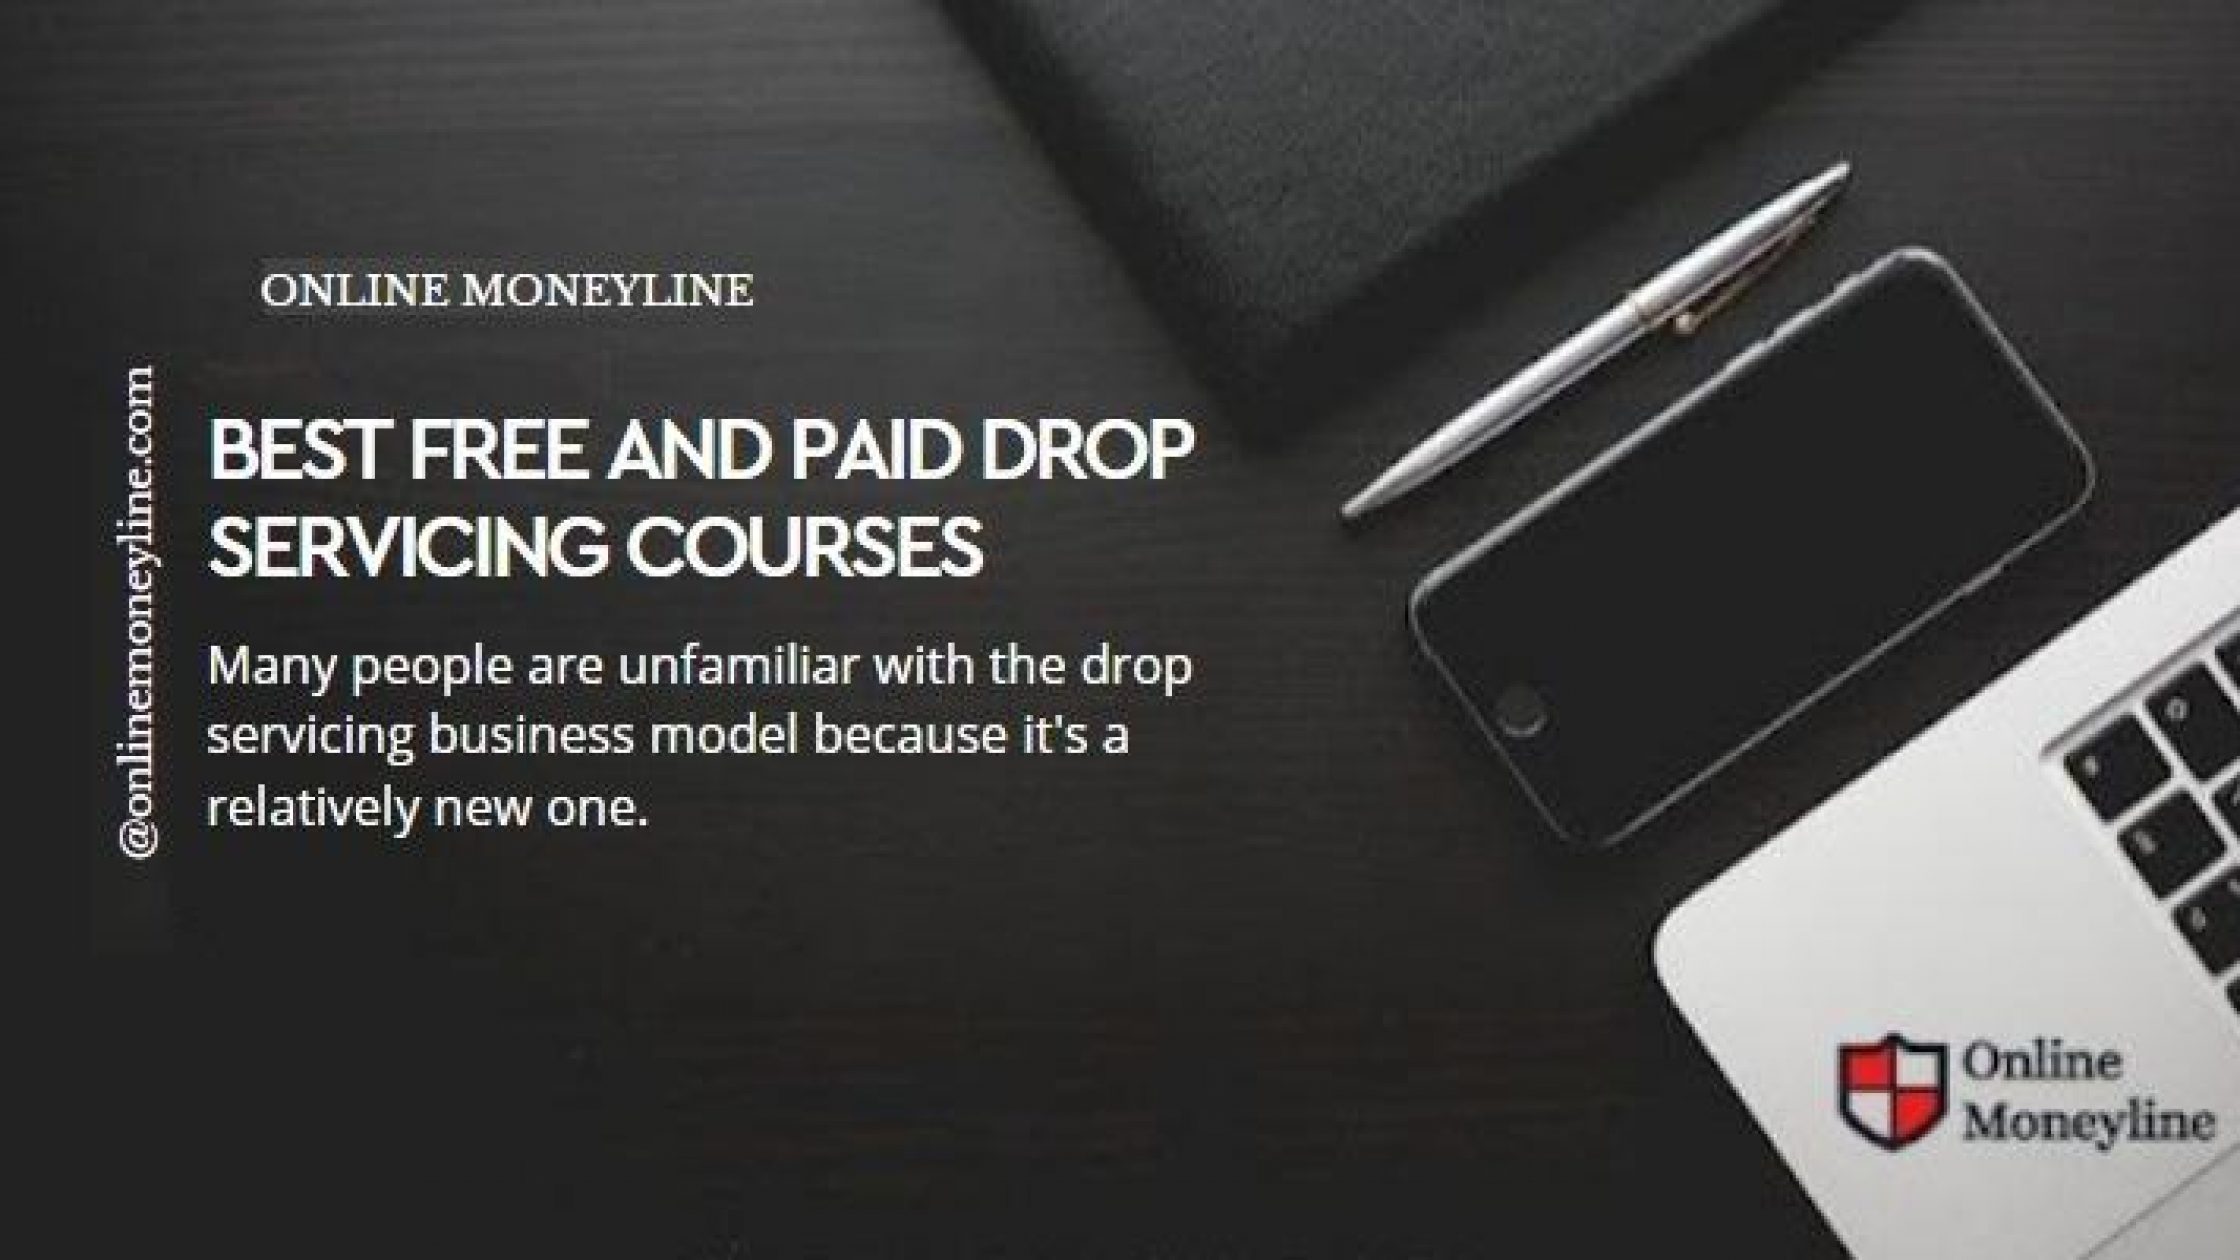 Best free and paid Drop Servicing Courses